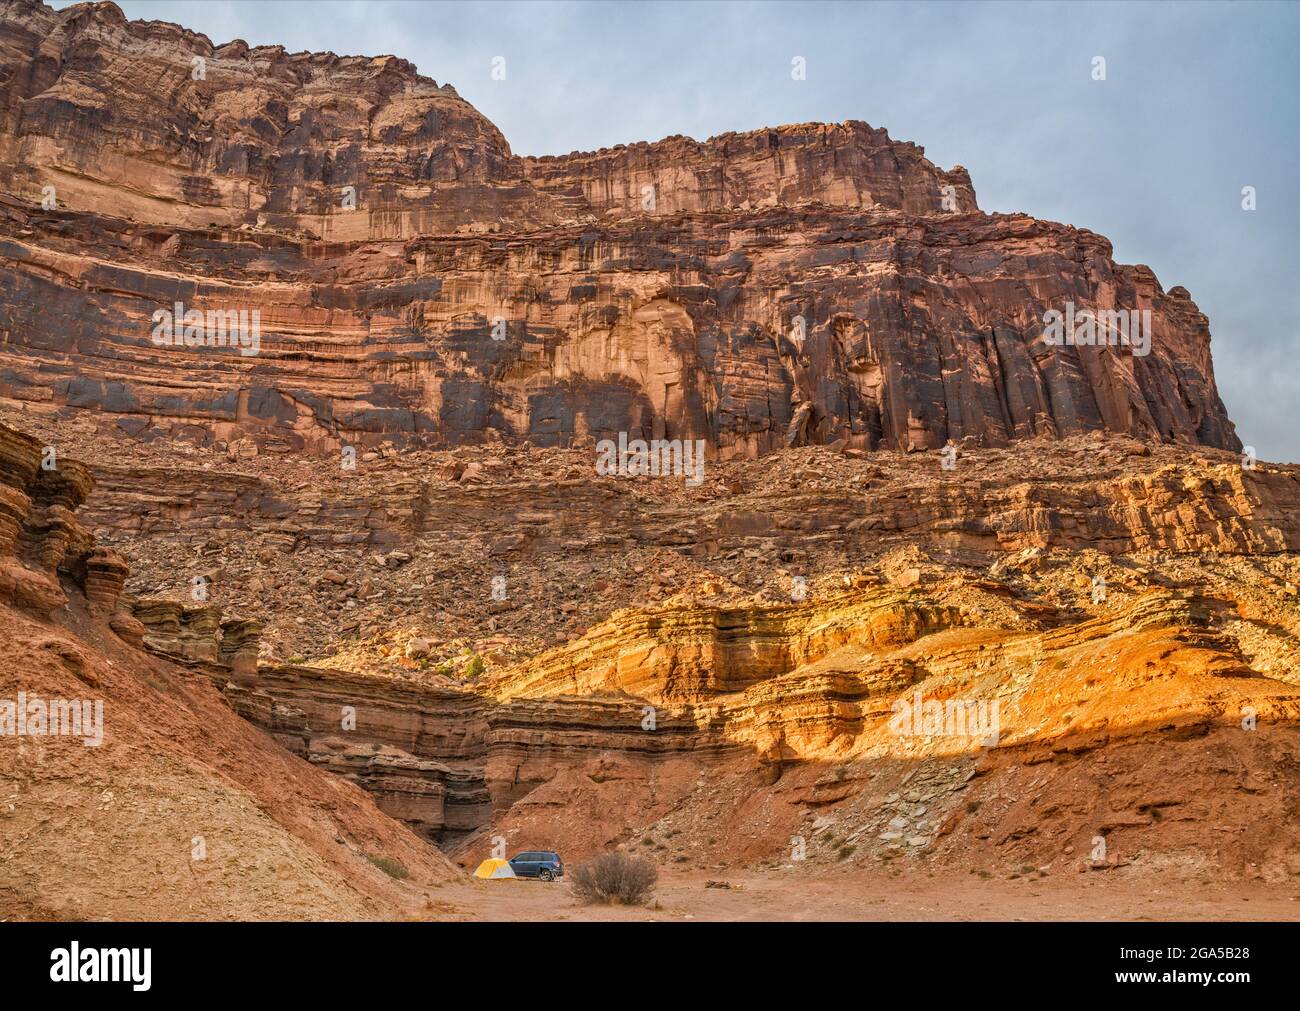 Secluded campsite under cliffs near Mexican Mountain Road and San Rafael River, at sunset, near Buckhorn Wash, San Rafael Swell area, Utah, USA Stock Photo